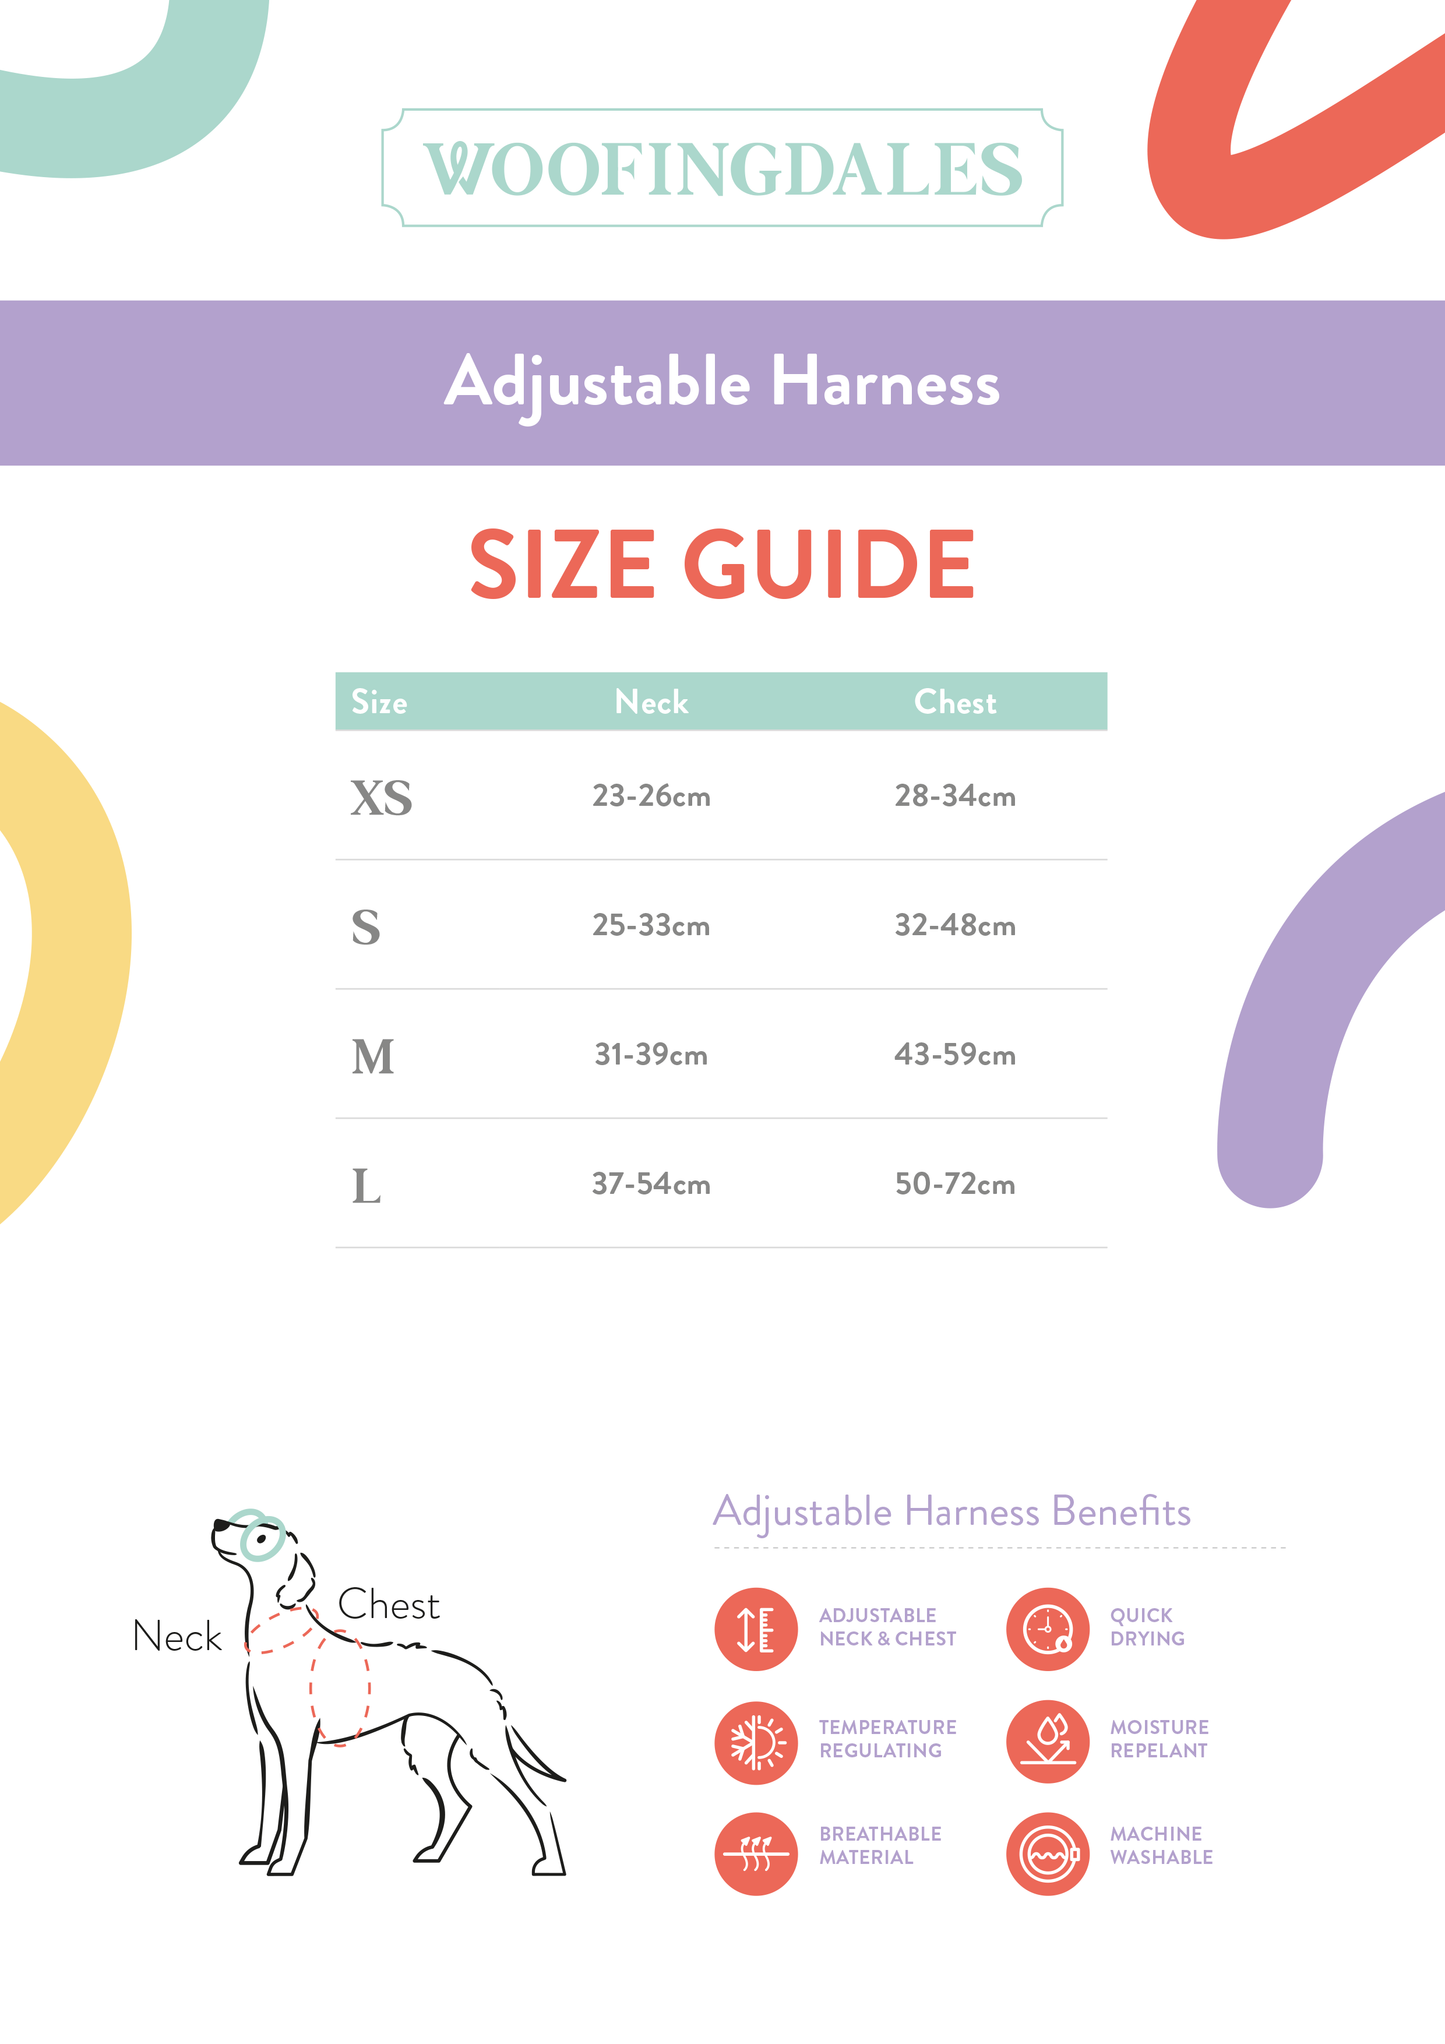 Woofingdales Poster - Size Guide for Adjustable Harness